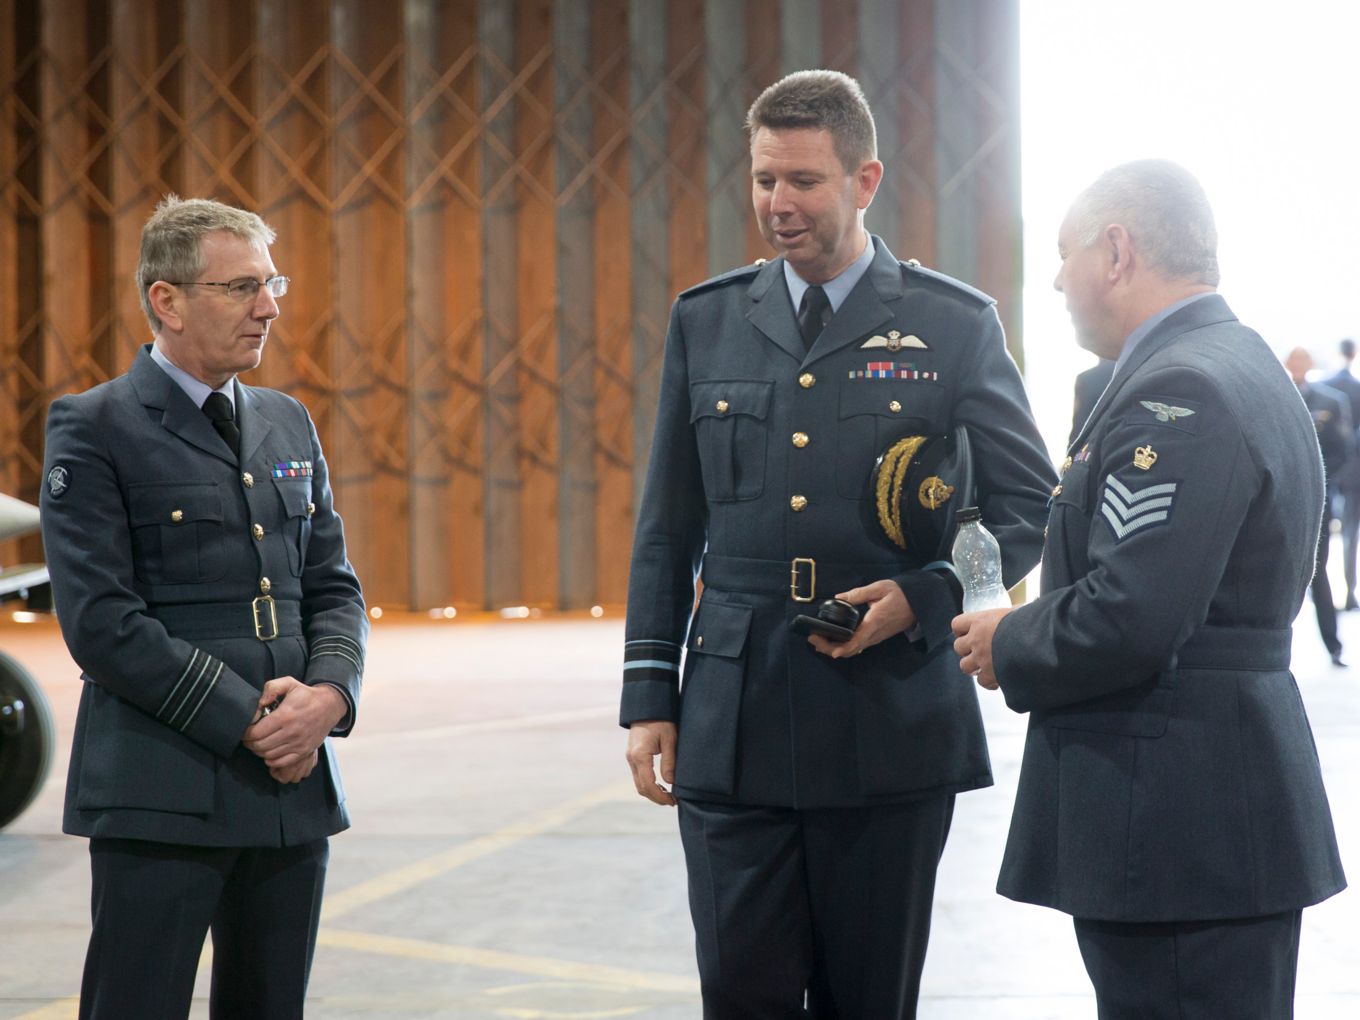 From left to right: Wing Commander Mike Ainsworth, AVM Warren James, Flight Sergeant Dave Hughes